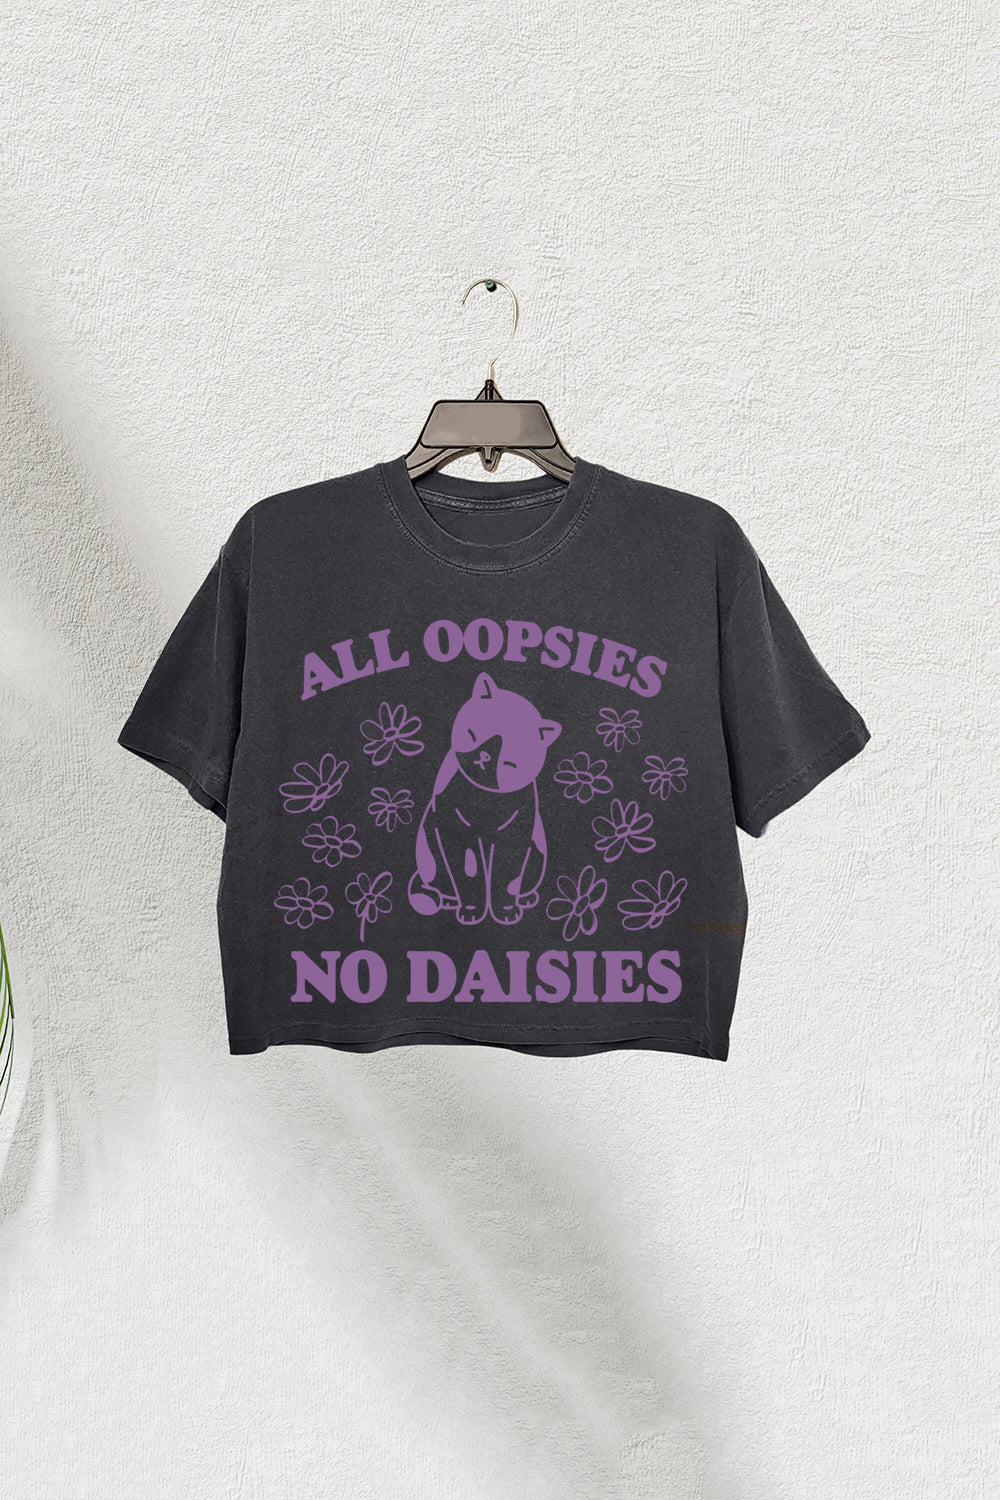 All Oopsies No Daisies Retro Graphic Crop Tee For Women